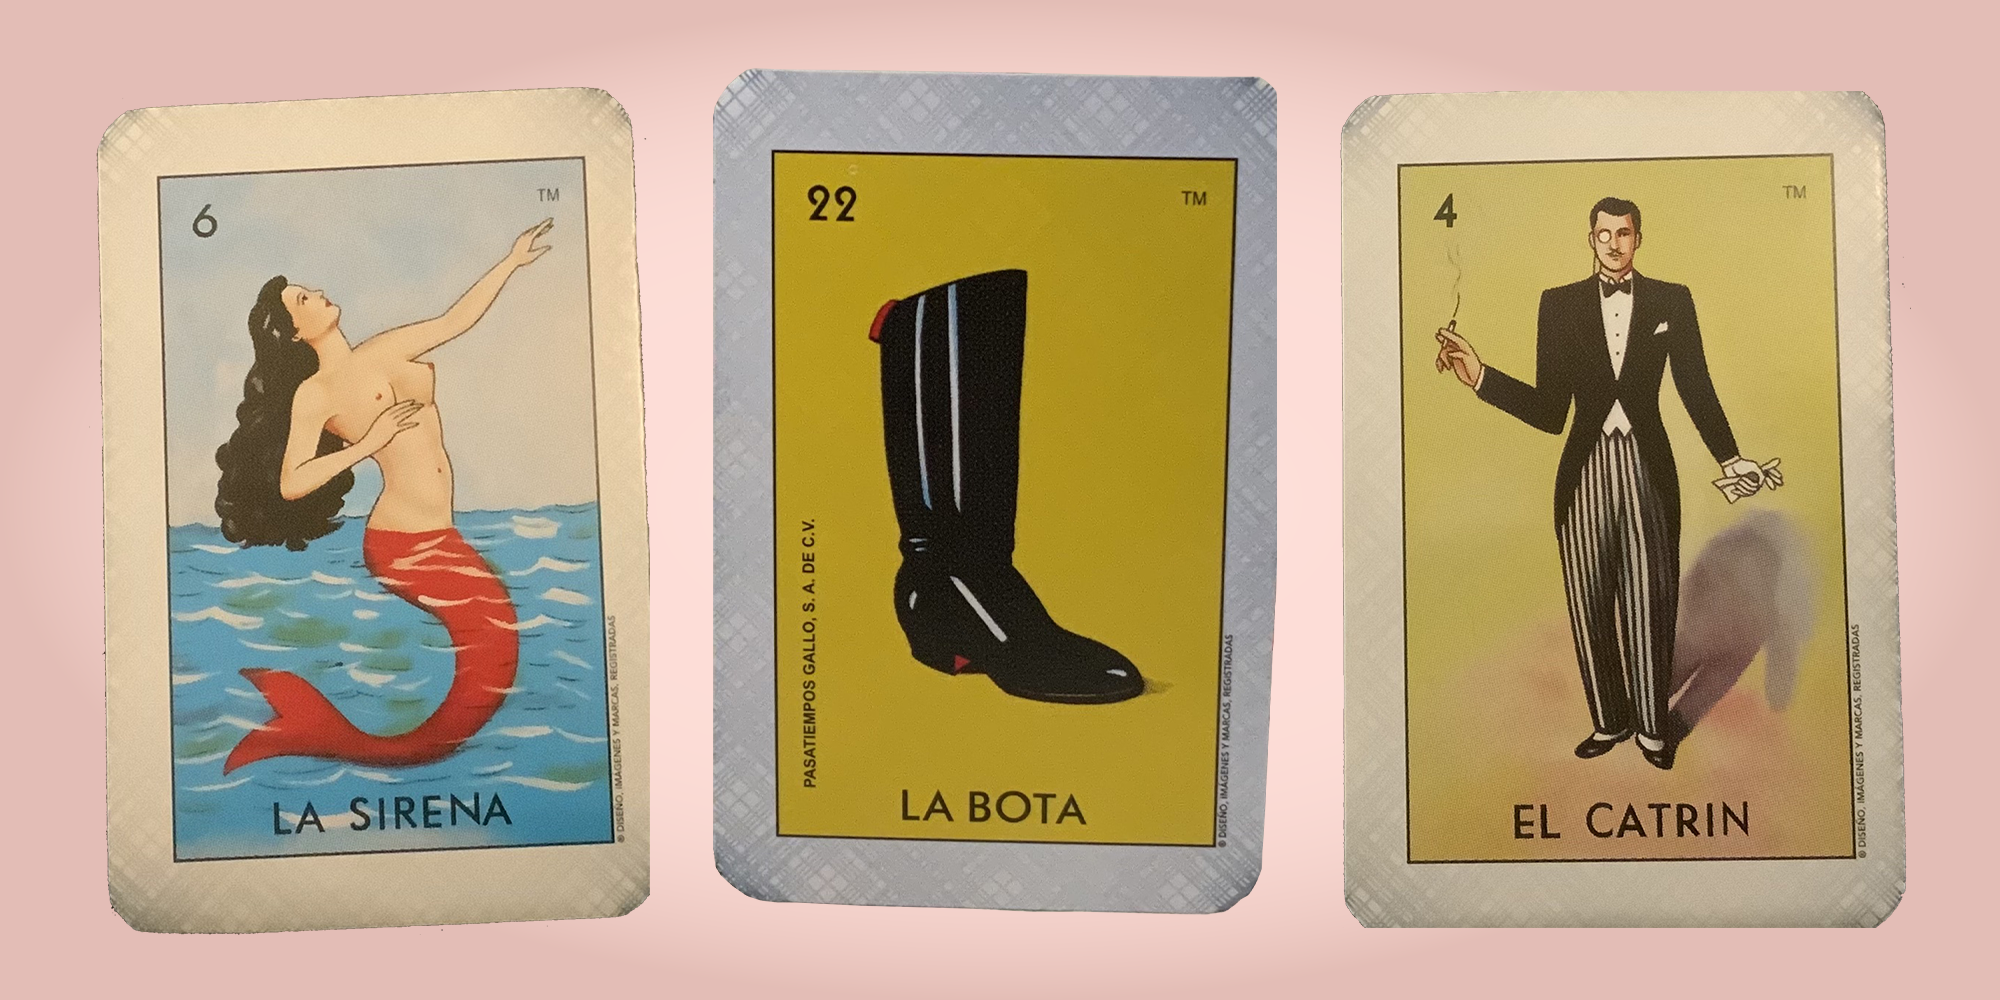 collage of 3 La Loteria cards on a blush colored background. Card 6, La Sirena depicting a mermaid. Card 22, La Bota depicting a tall black boot. Card 4, El Catrin depicting a tall Spaniard in a tuxedo.